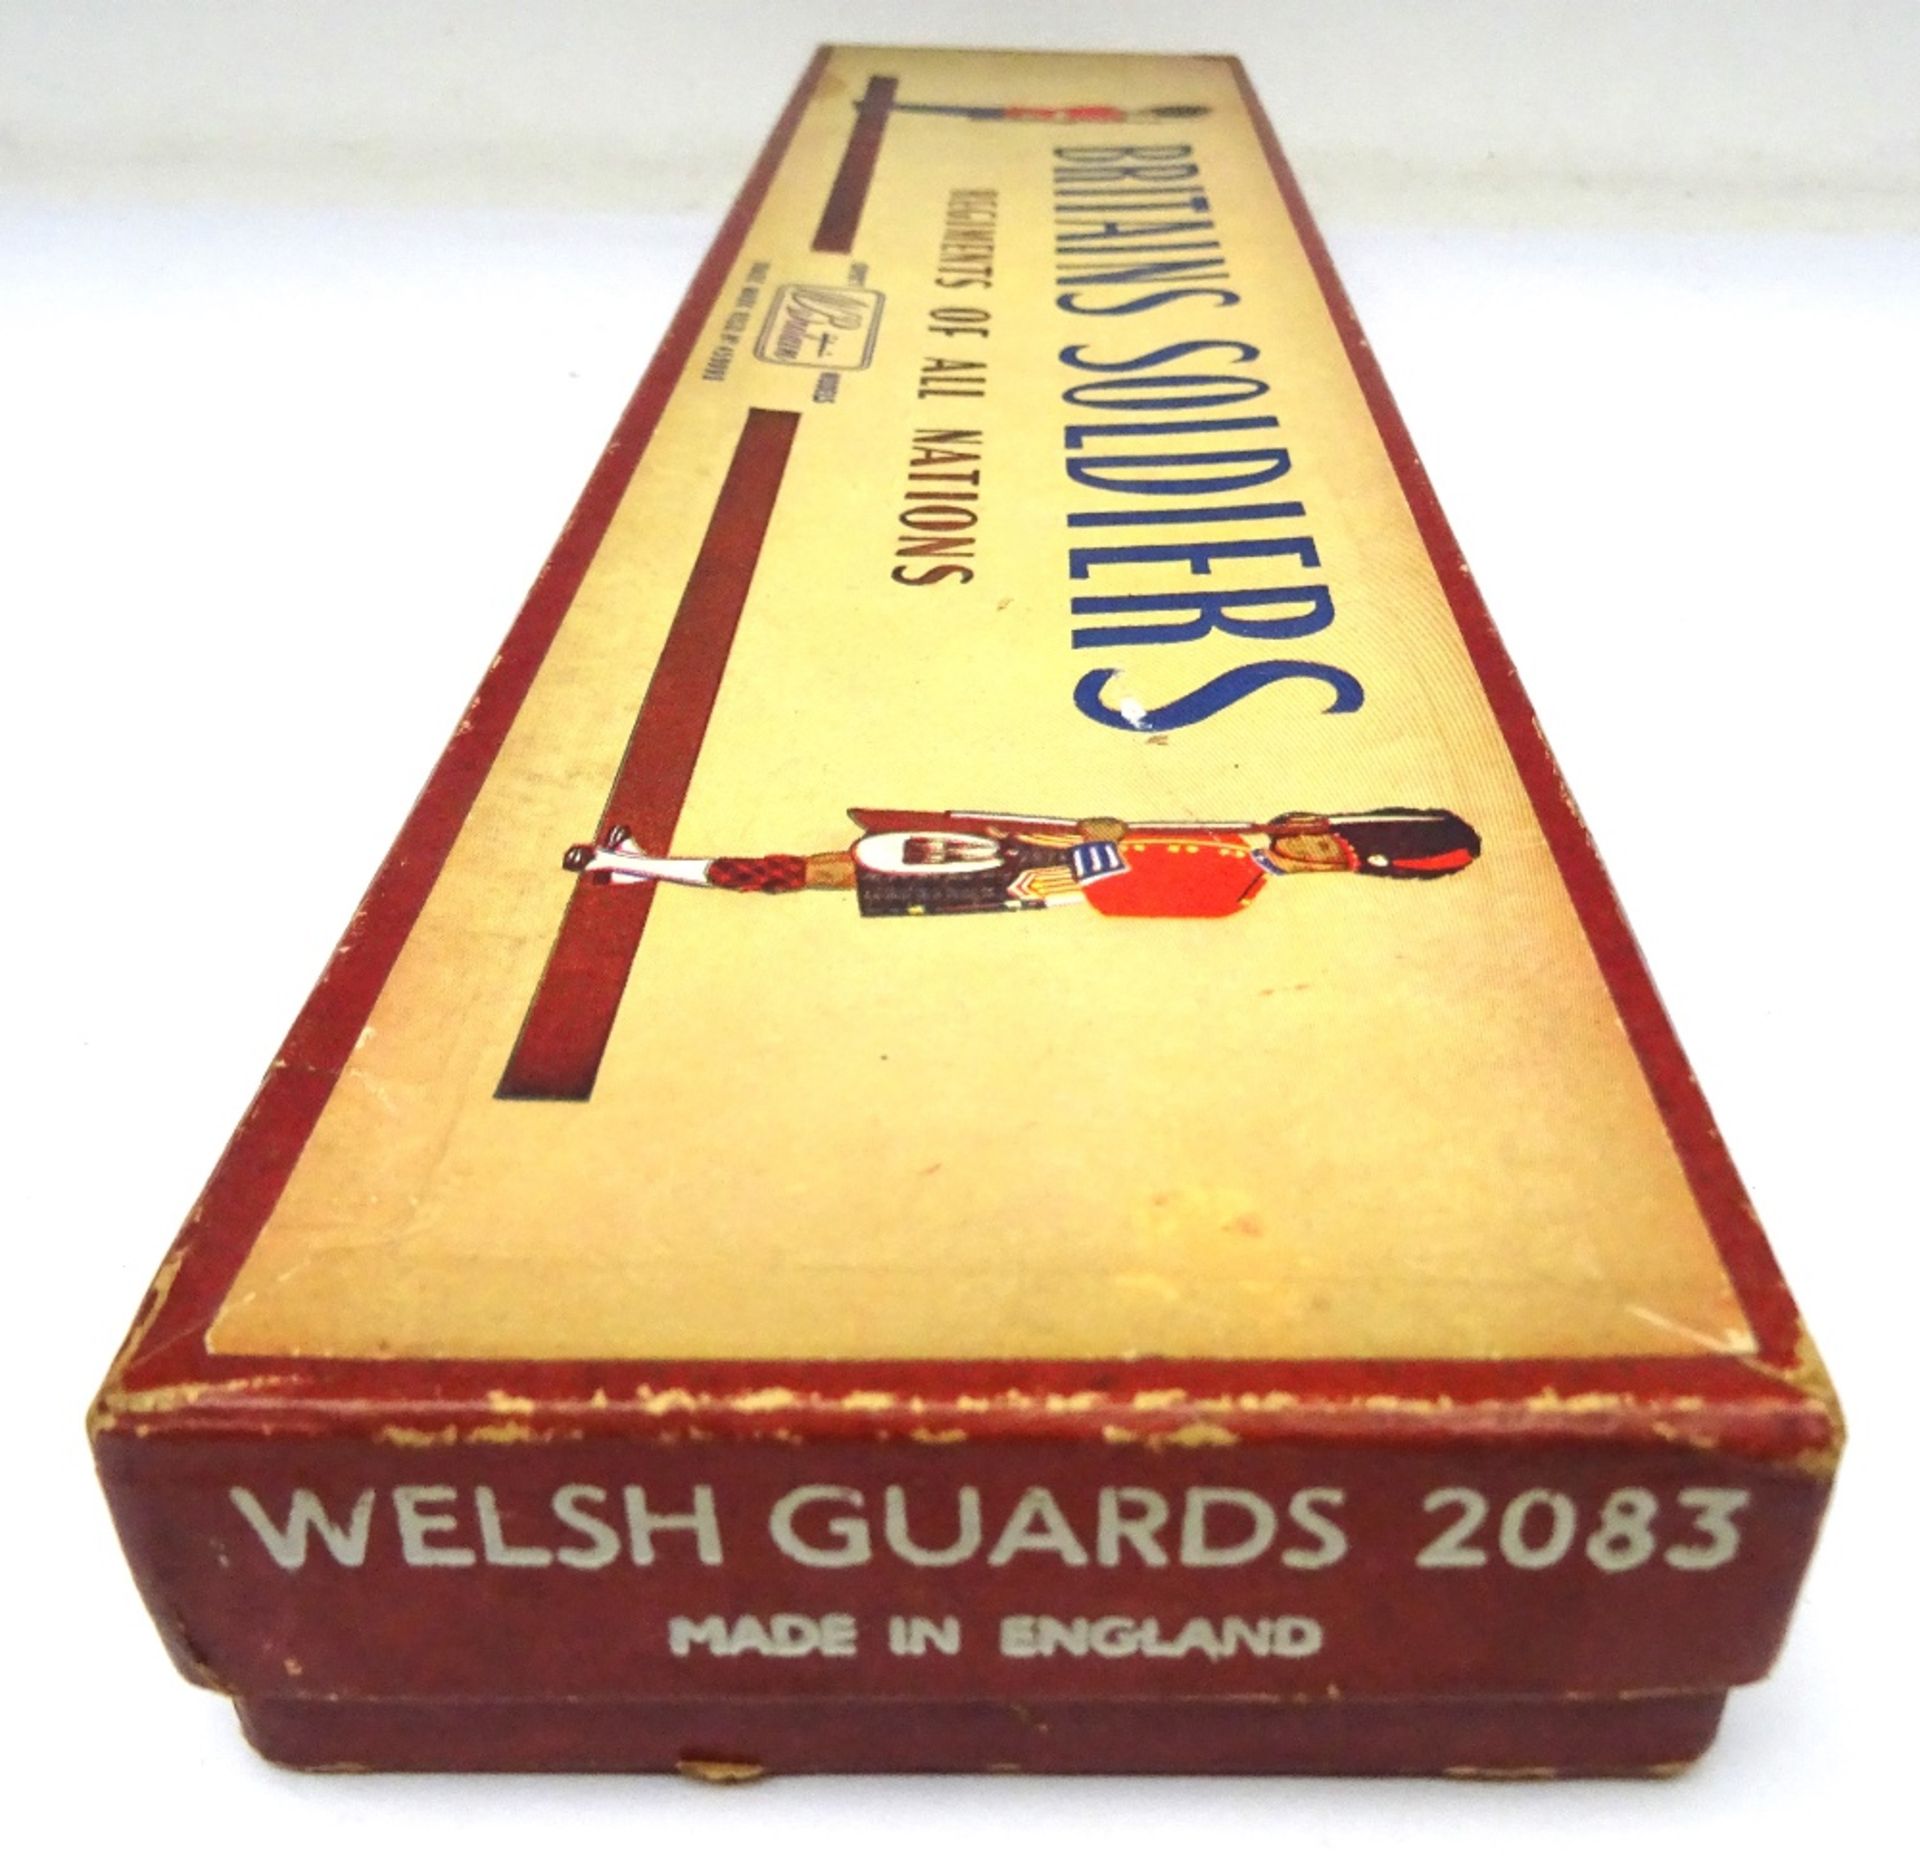 Britains Foot Guards set 2083 Welsh Guards - Image 3 of 6